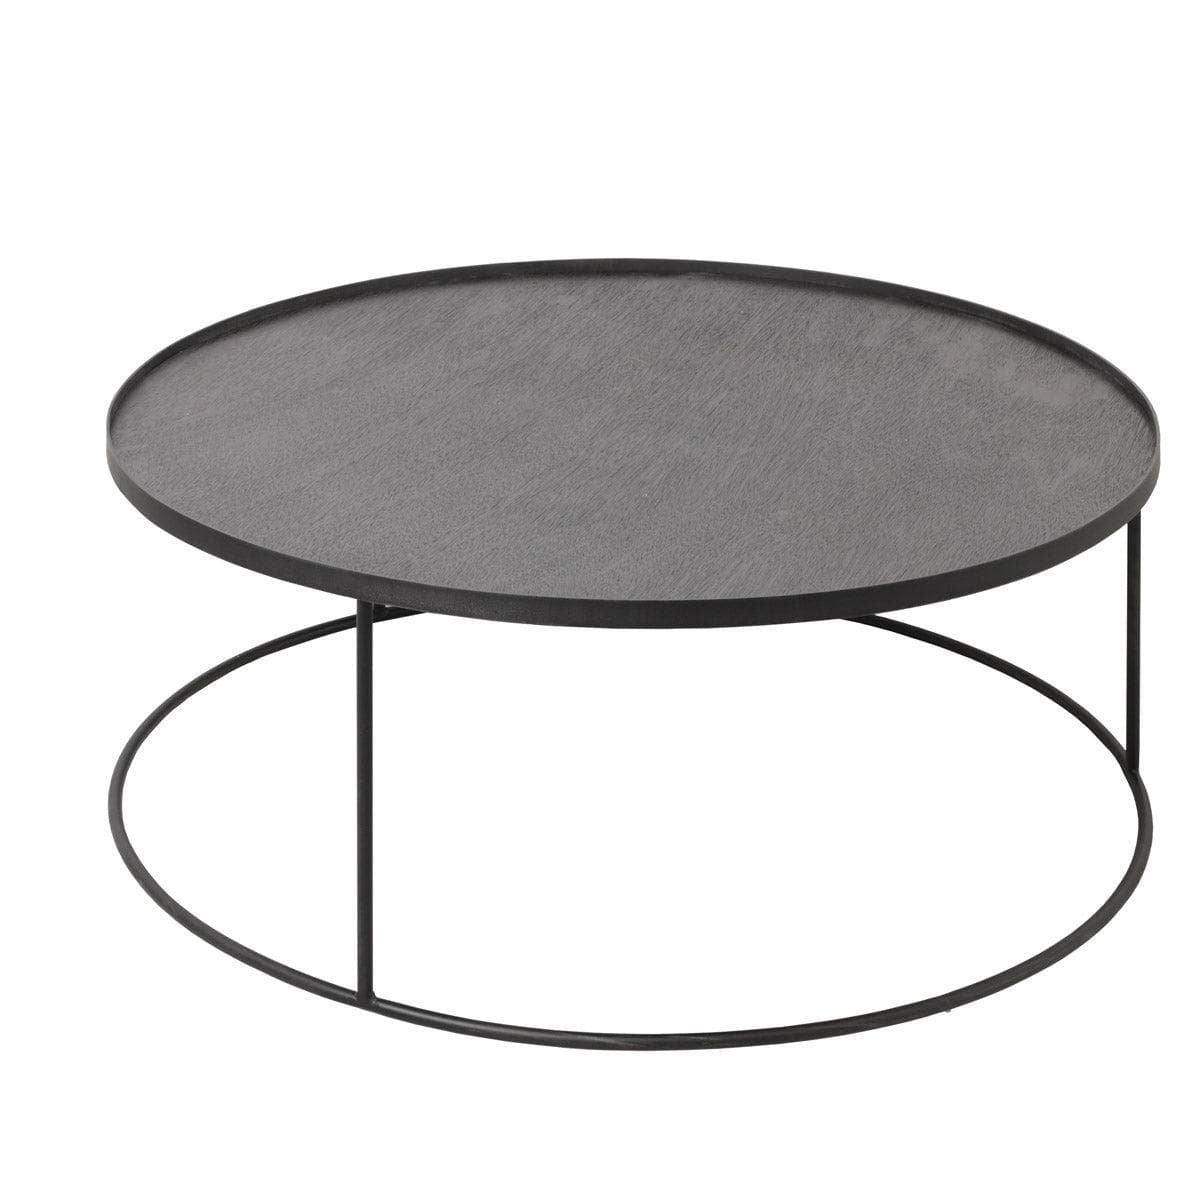 ROUND tray table